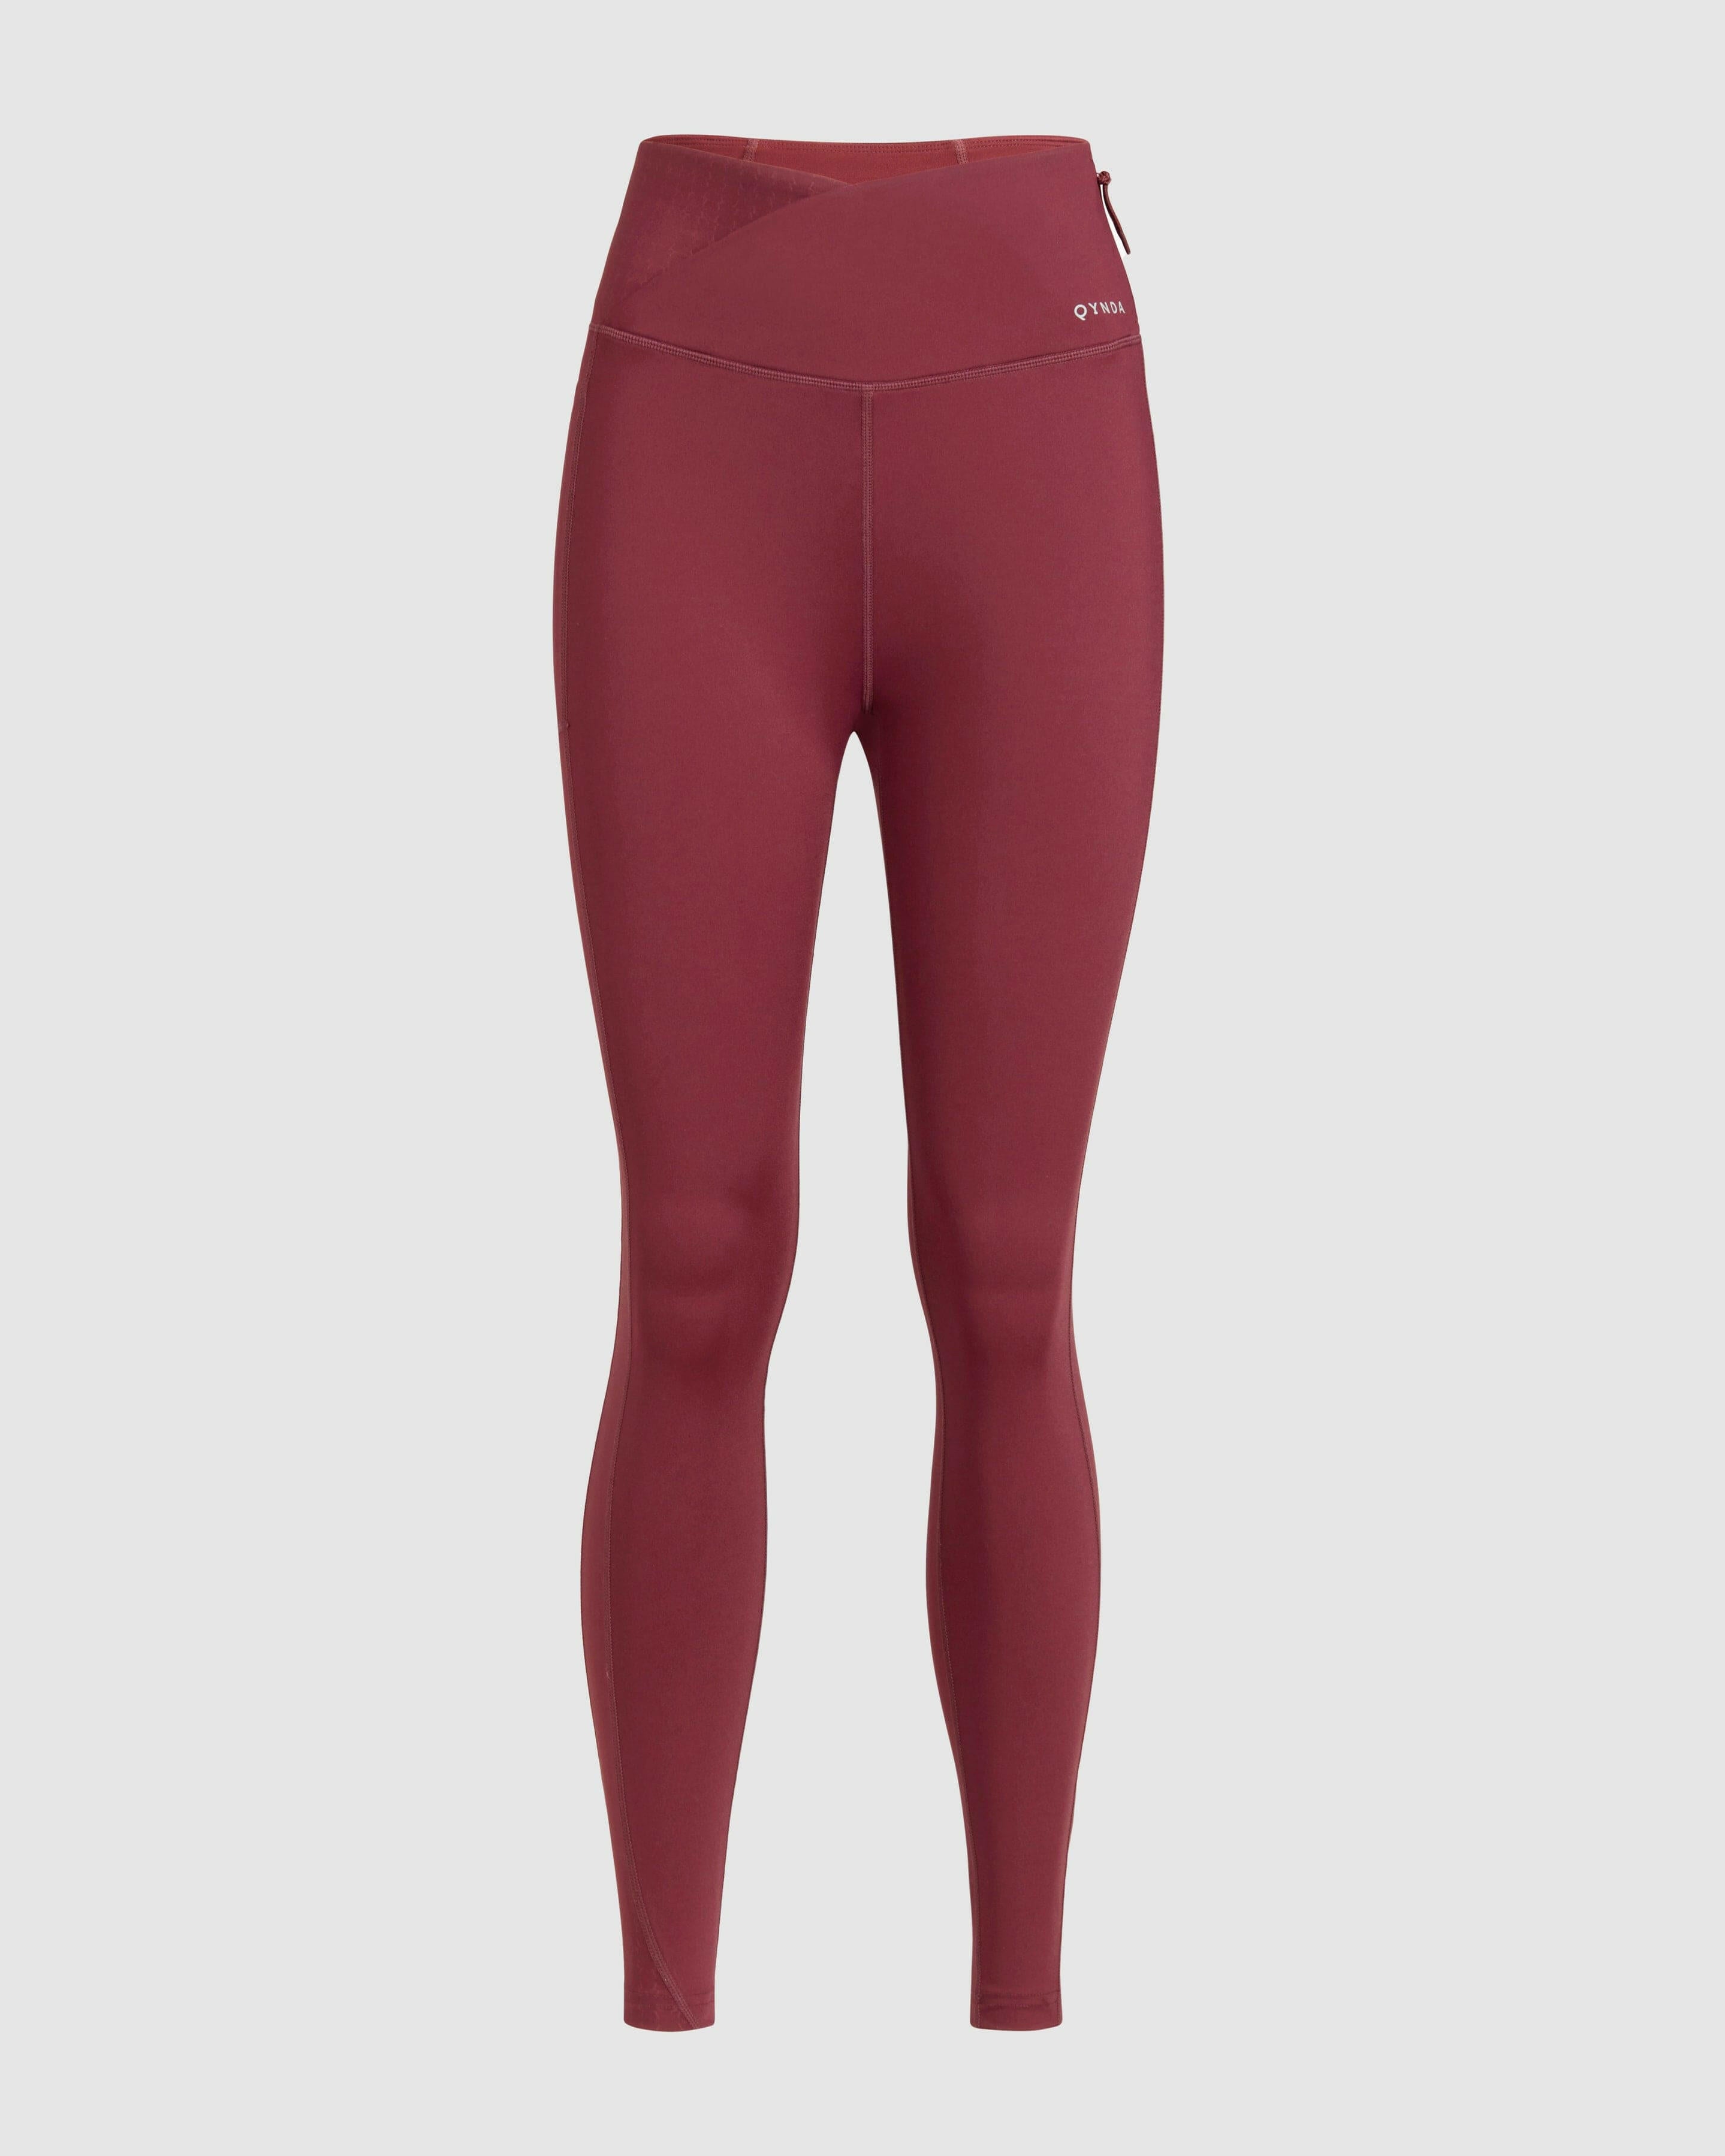 Stylish Maroon LADINA LEGGINGS by Qynda with a high waistband and better-fitting, zipper detail on white background.